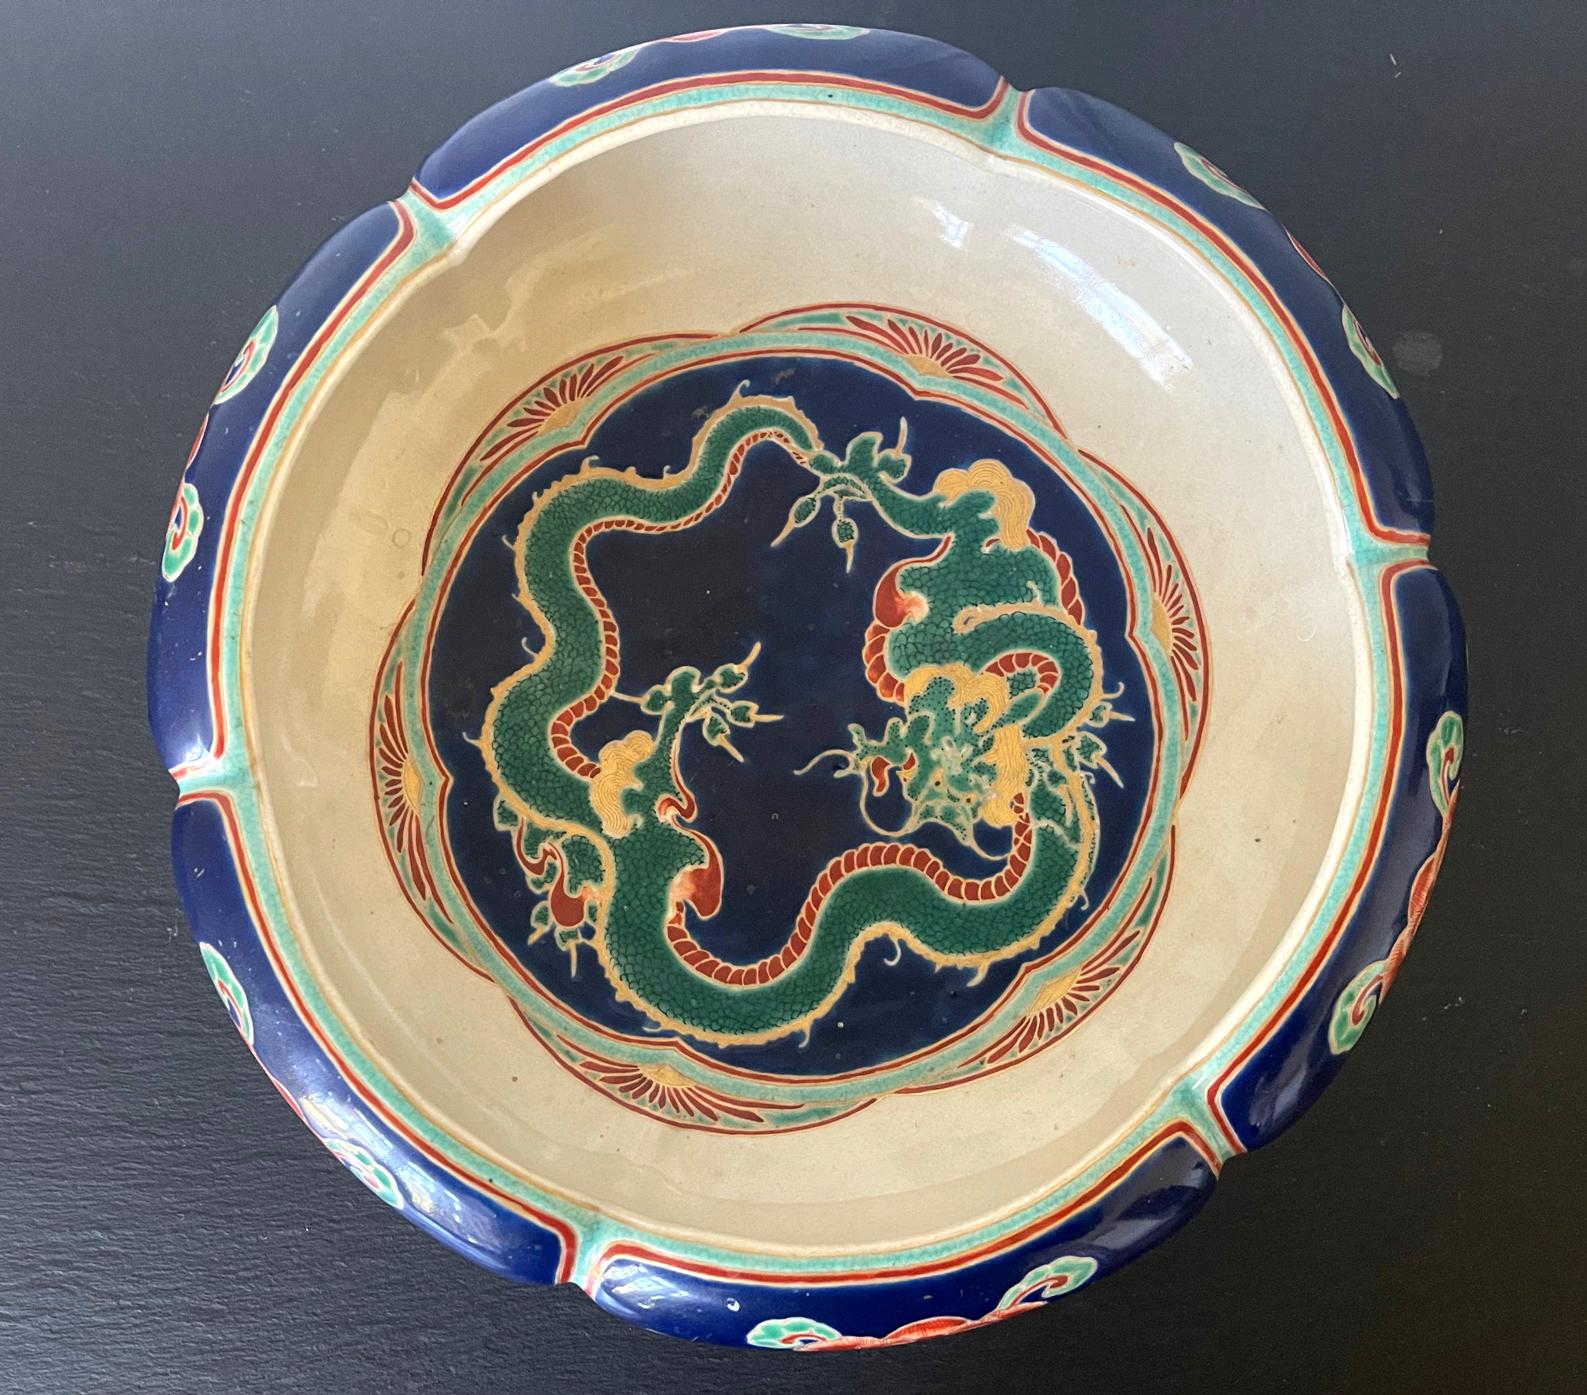 On offer is a rare ceramic bowl with overglazed design by the famed Japanese ceramic artist Makuzu Kozan (1842-1916), circa 1906-1916. The bowl is rather unusual from the potter's repertoire with its unique glaze colors and decoration, and it likely